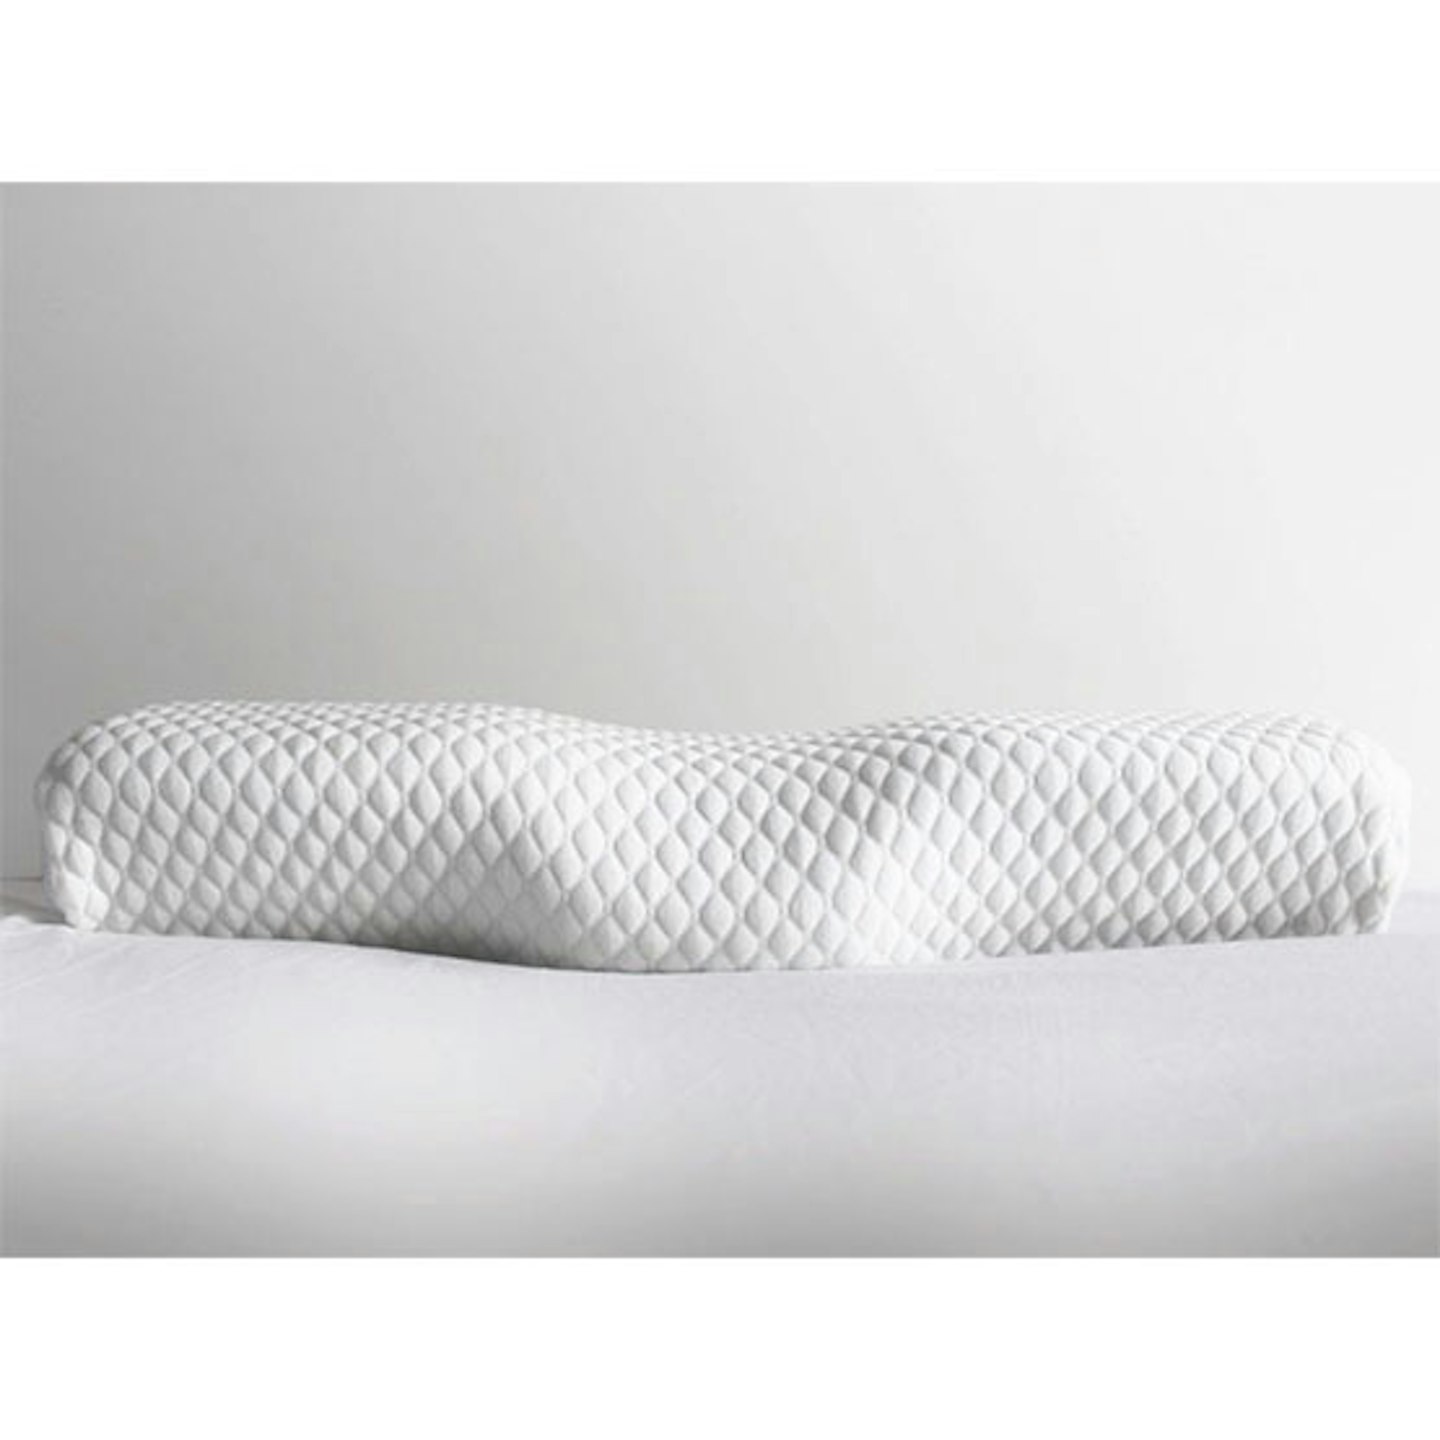 The best pillows for neck pain: EasySleeper pillow